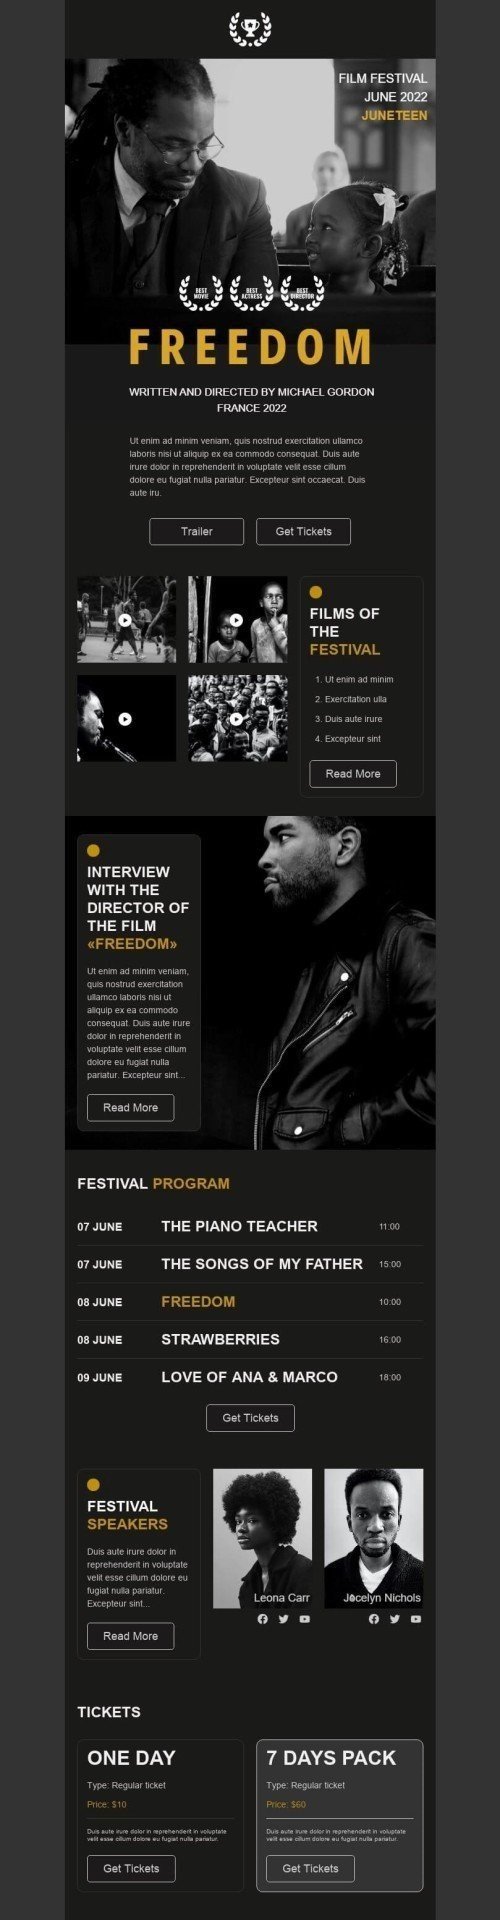 Juneteenth Email Template "Film Festival" for Movies industry desktop view